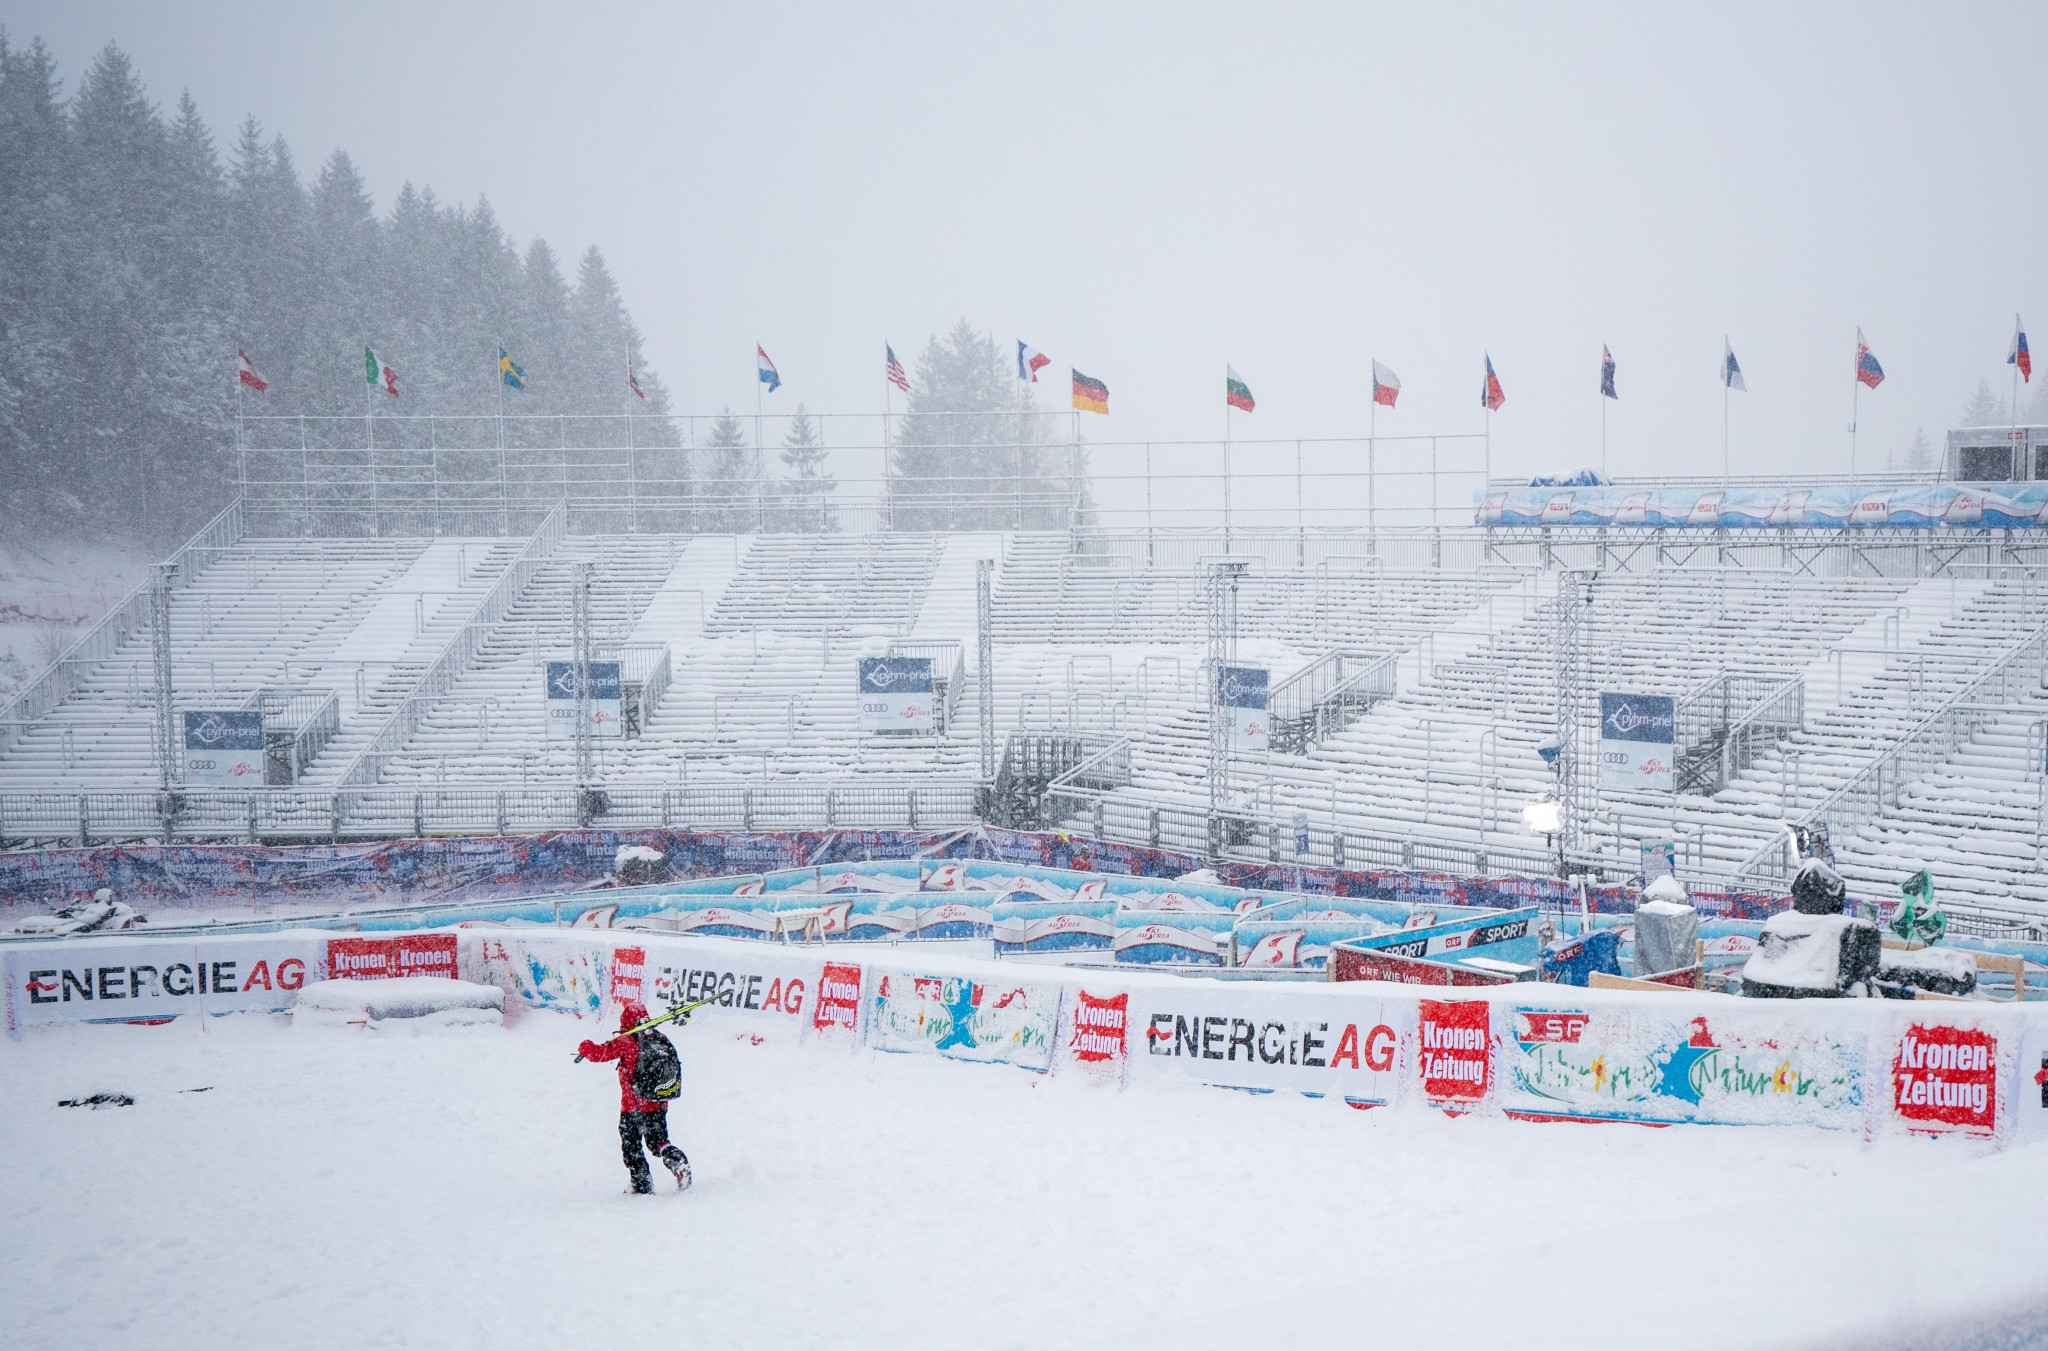 Combined event at FIS Alpine Skiing World Cup in Hinterstoder rescheduled due to weather